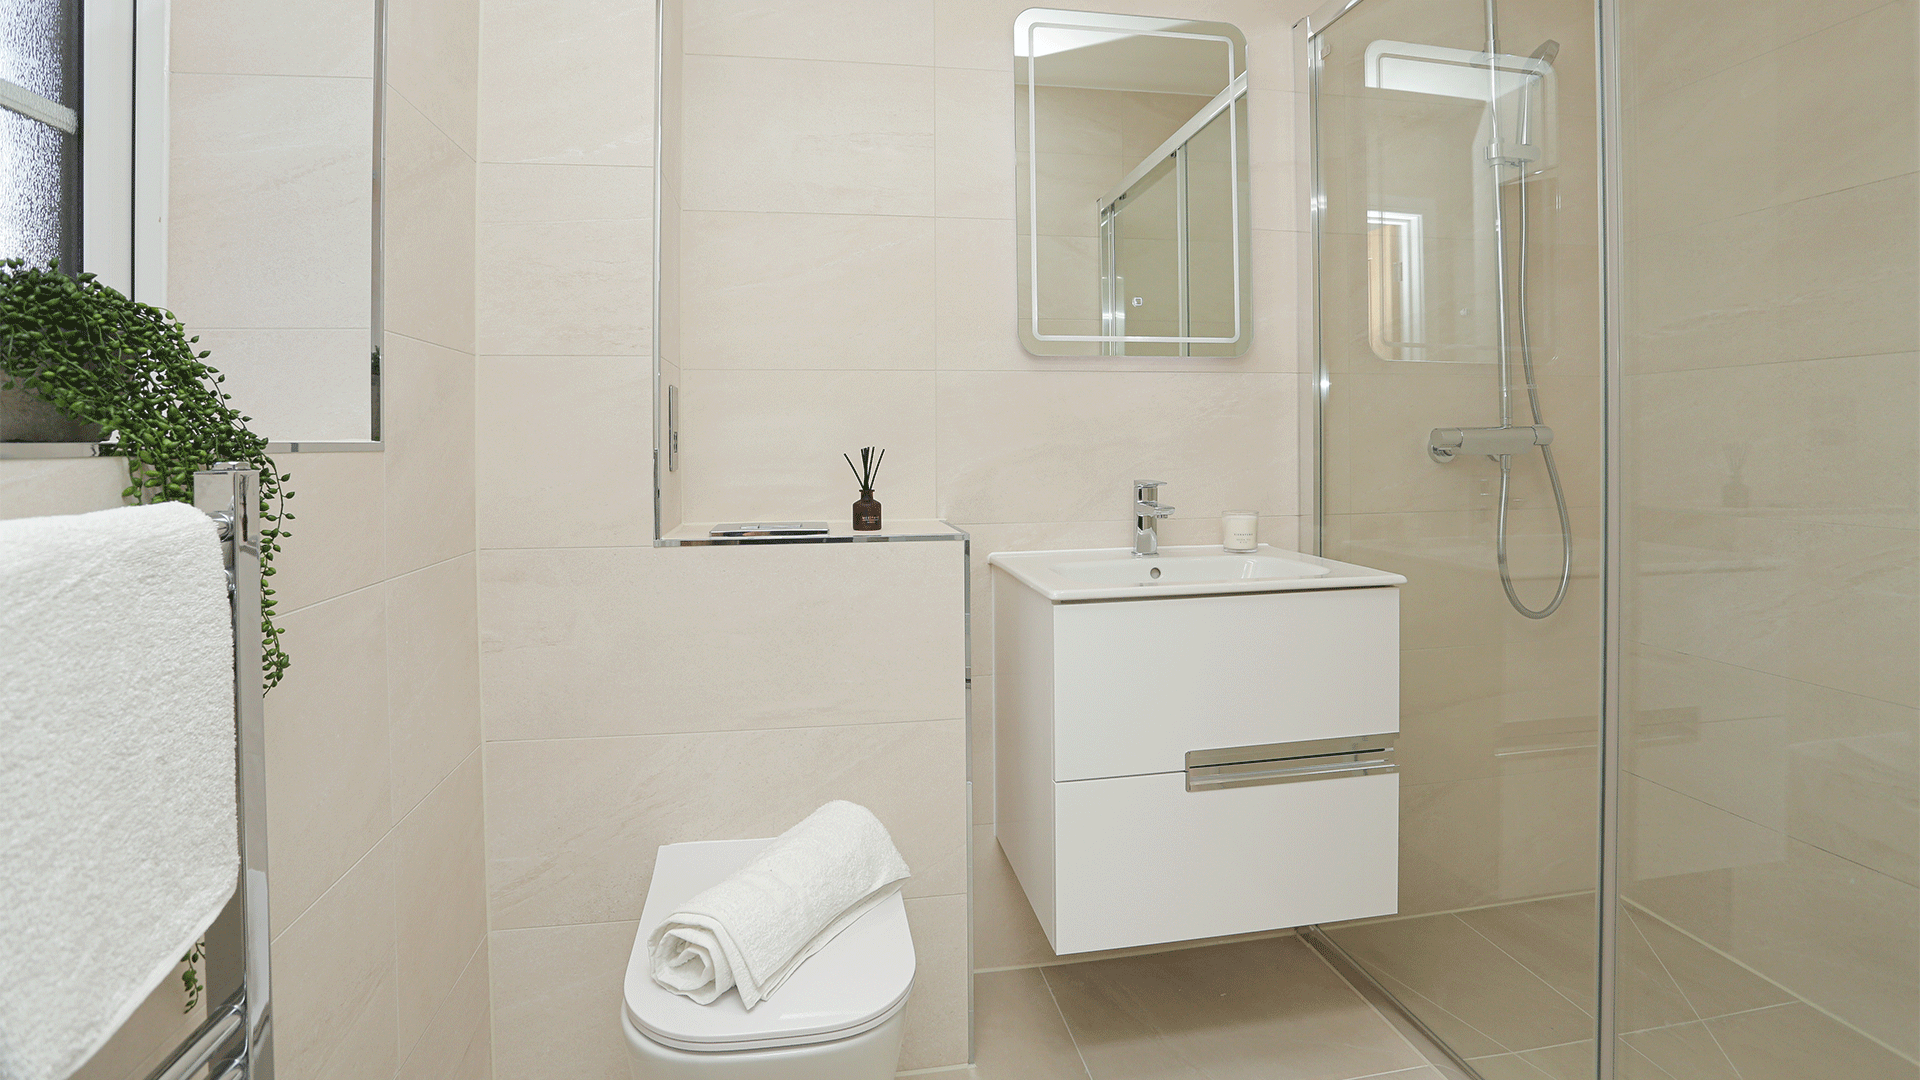 Tiled ensuite at plot 8 Miller's Meadow, with toilet, enclosed shower, sink basin, potted plant and mirror